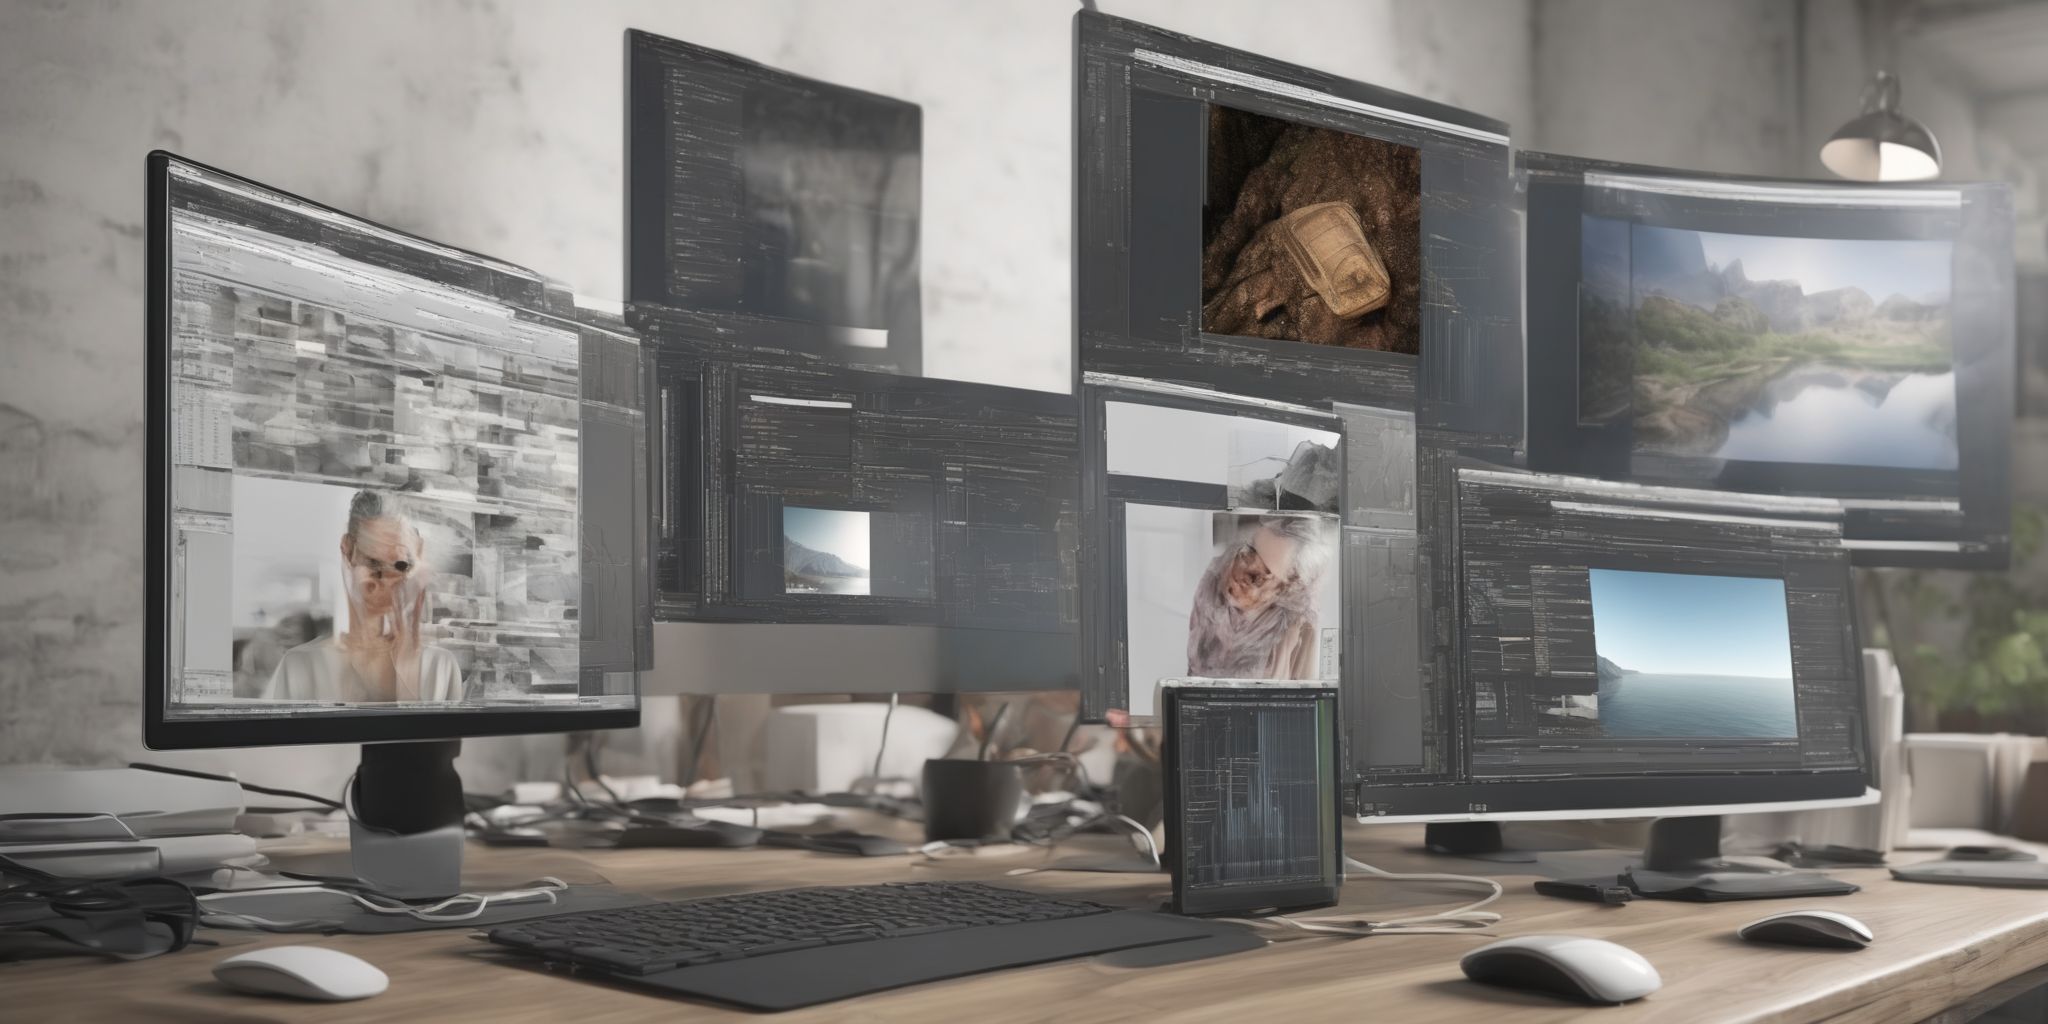 Software  in realistic, photographic style